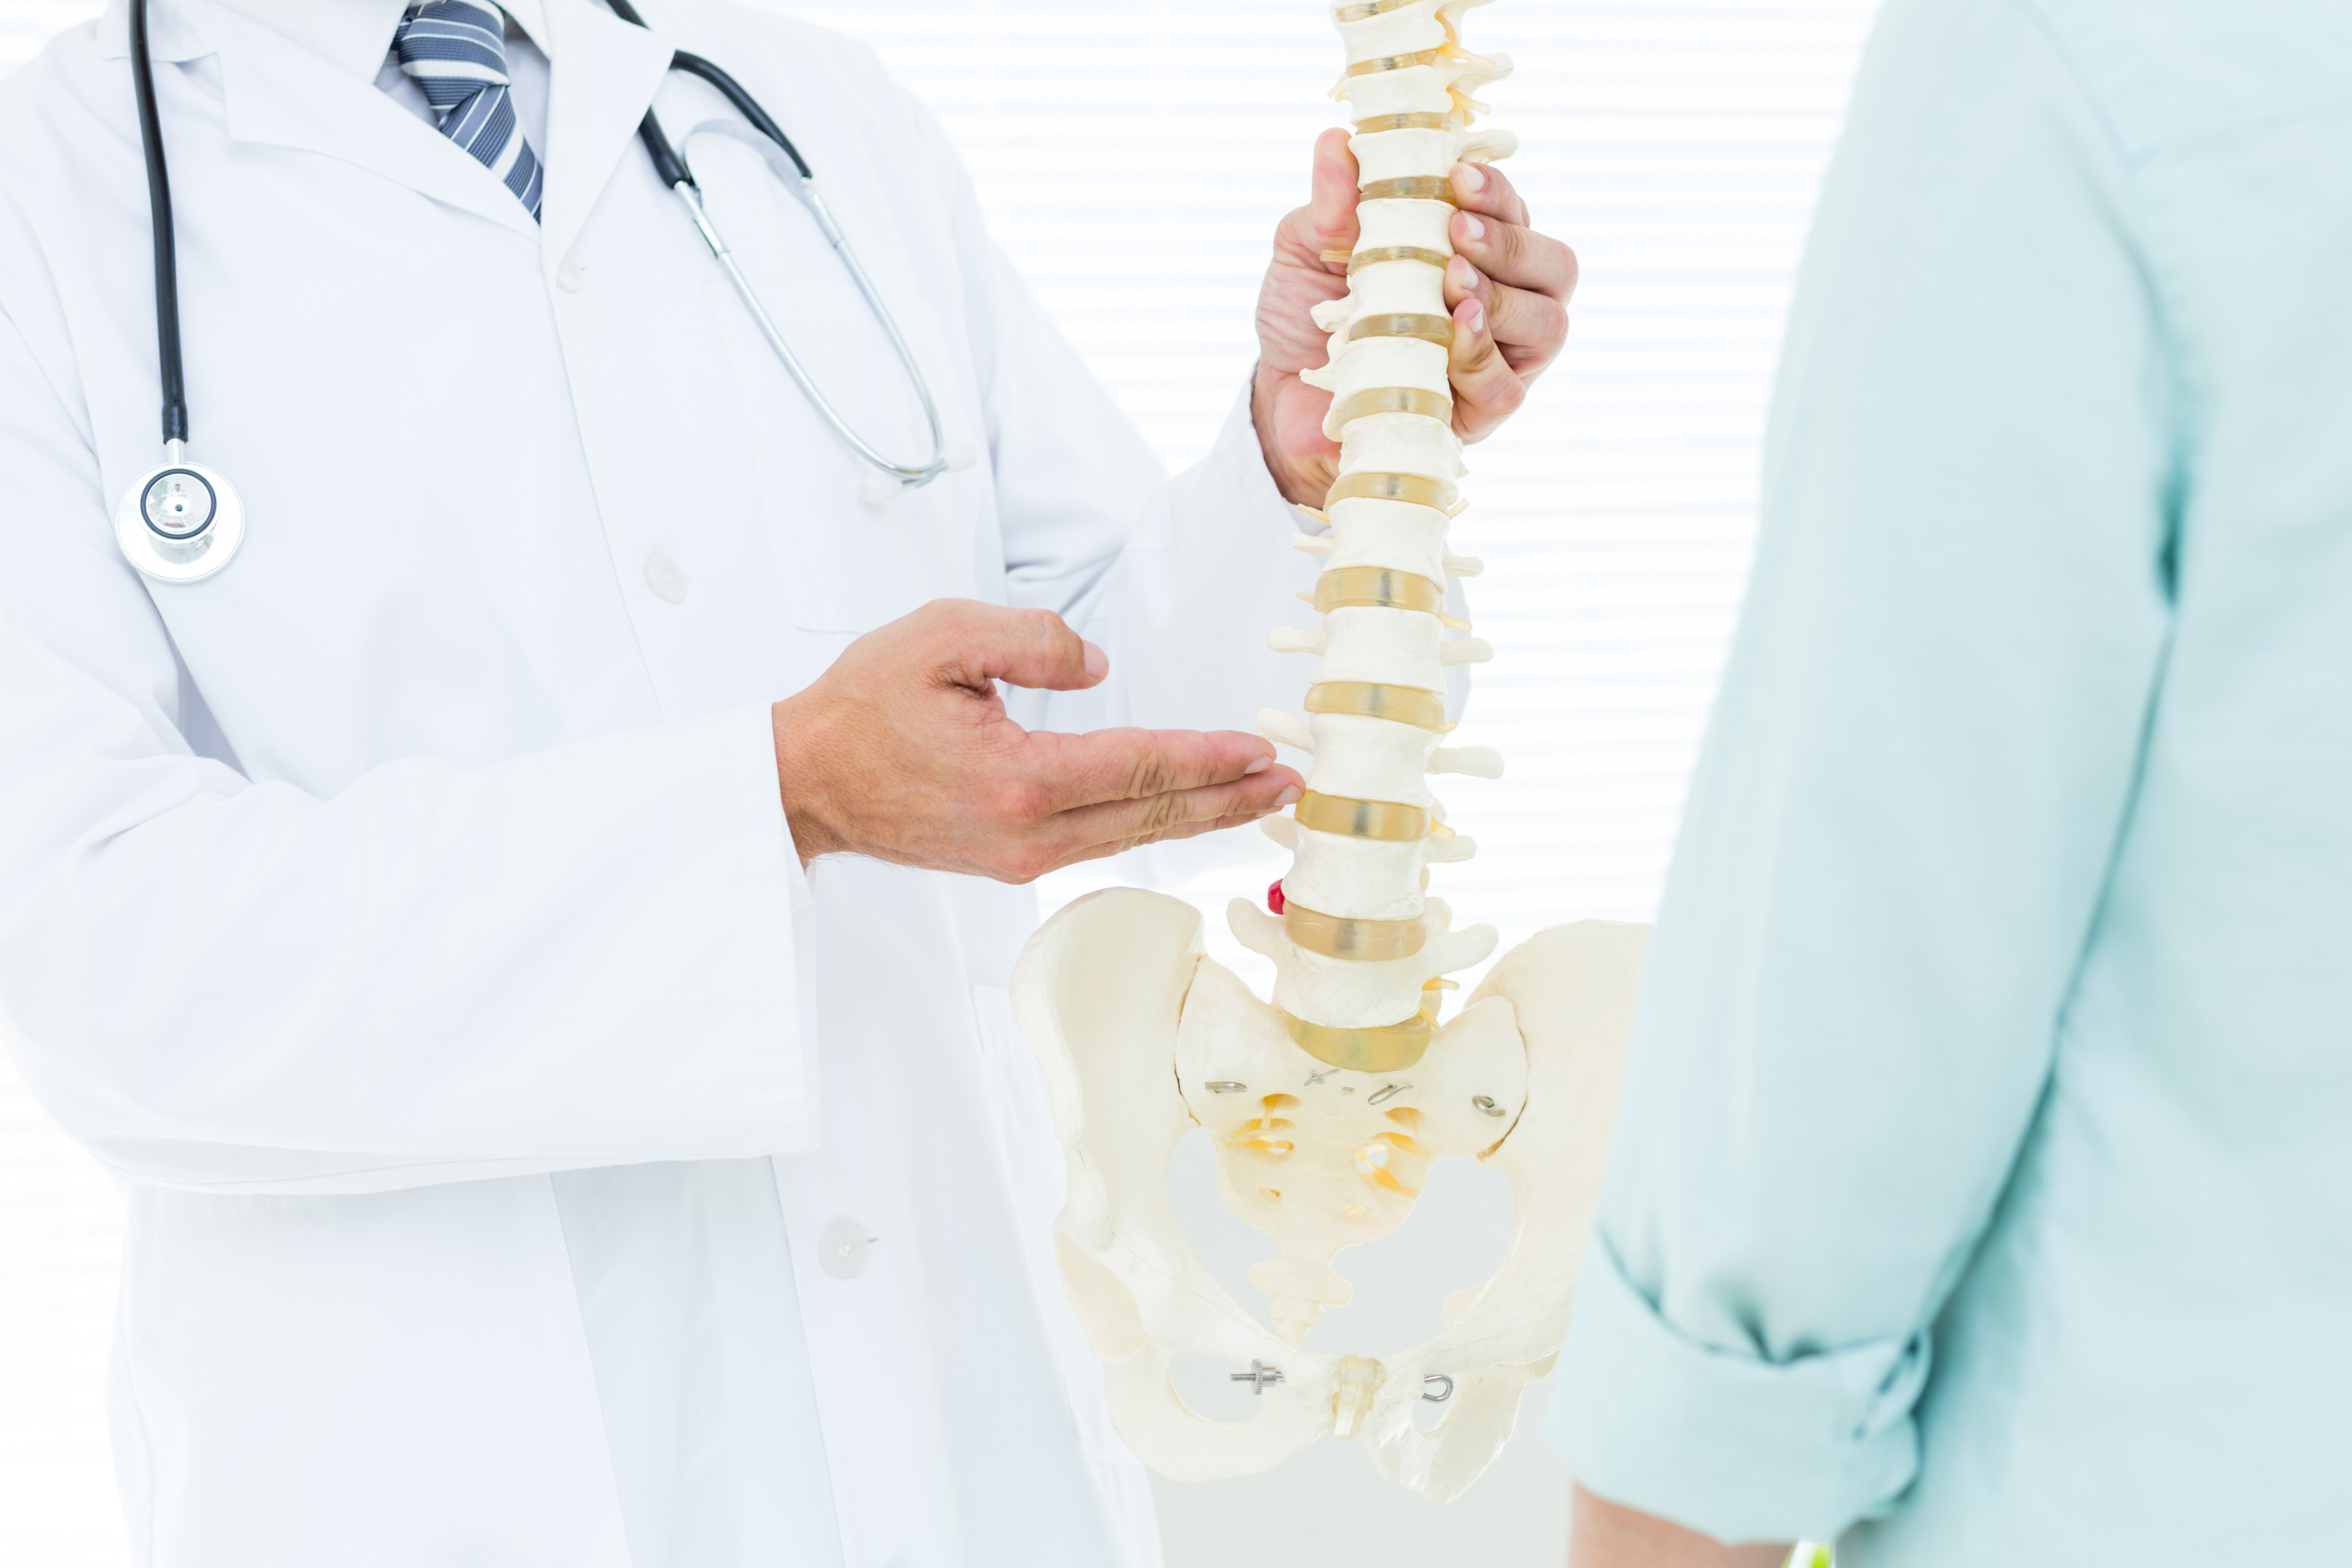 Chiropractor showing model of spine to patient